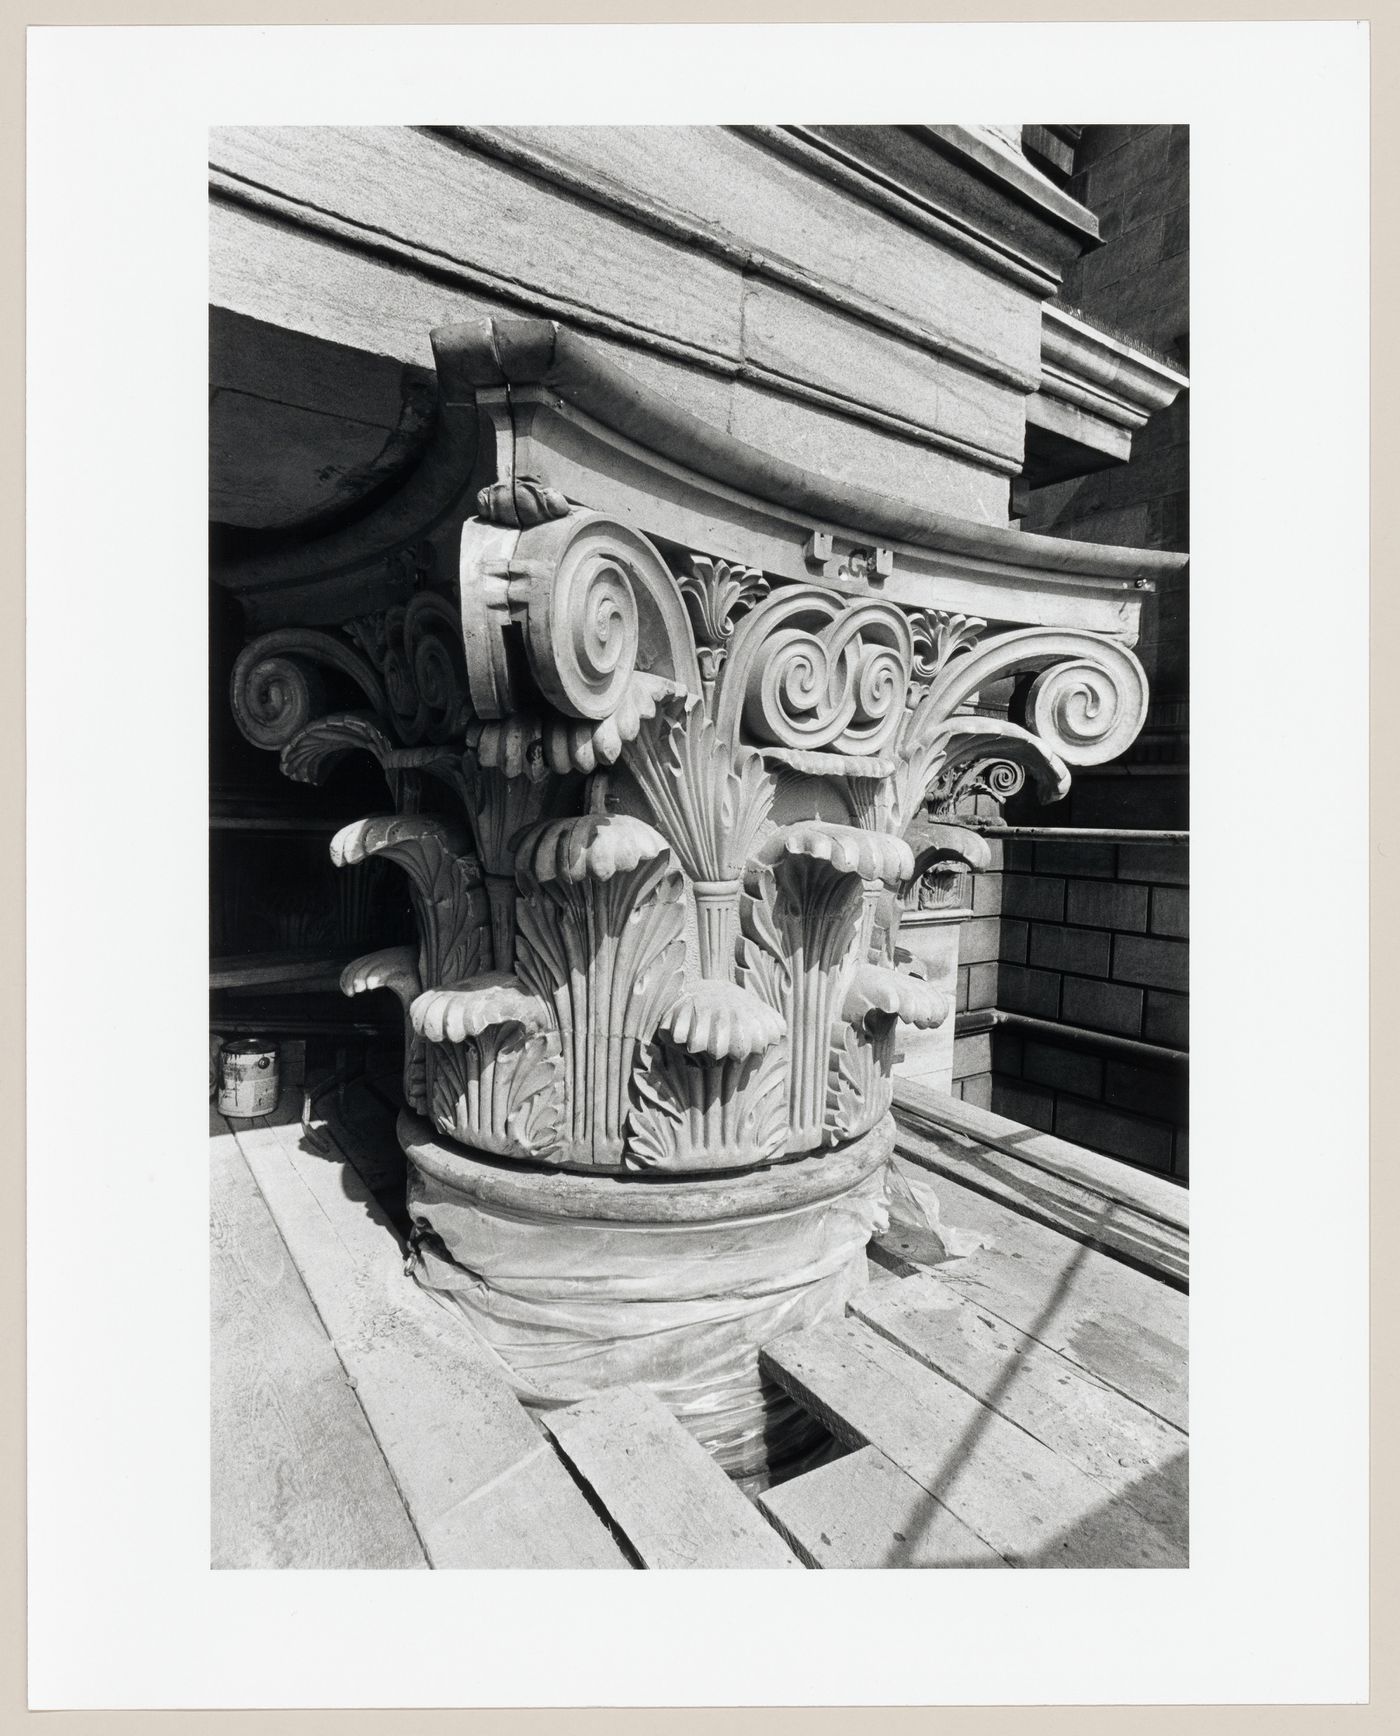 View of four installed one-quarter test sections during the restoration of the Corinthian capitals of the principal façade of the Head Office of the Bank of Montréal, 119 rue Saint-Jacques, Montréal, Québec